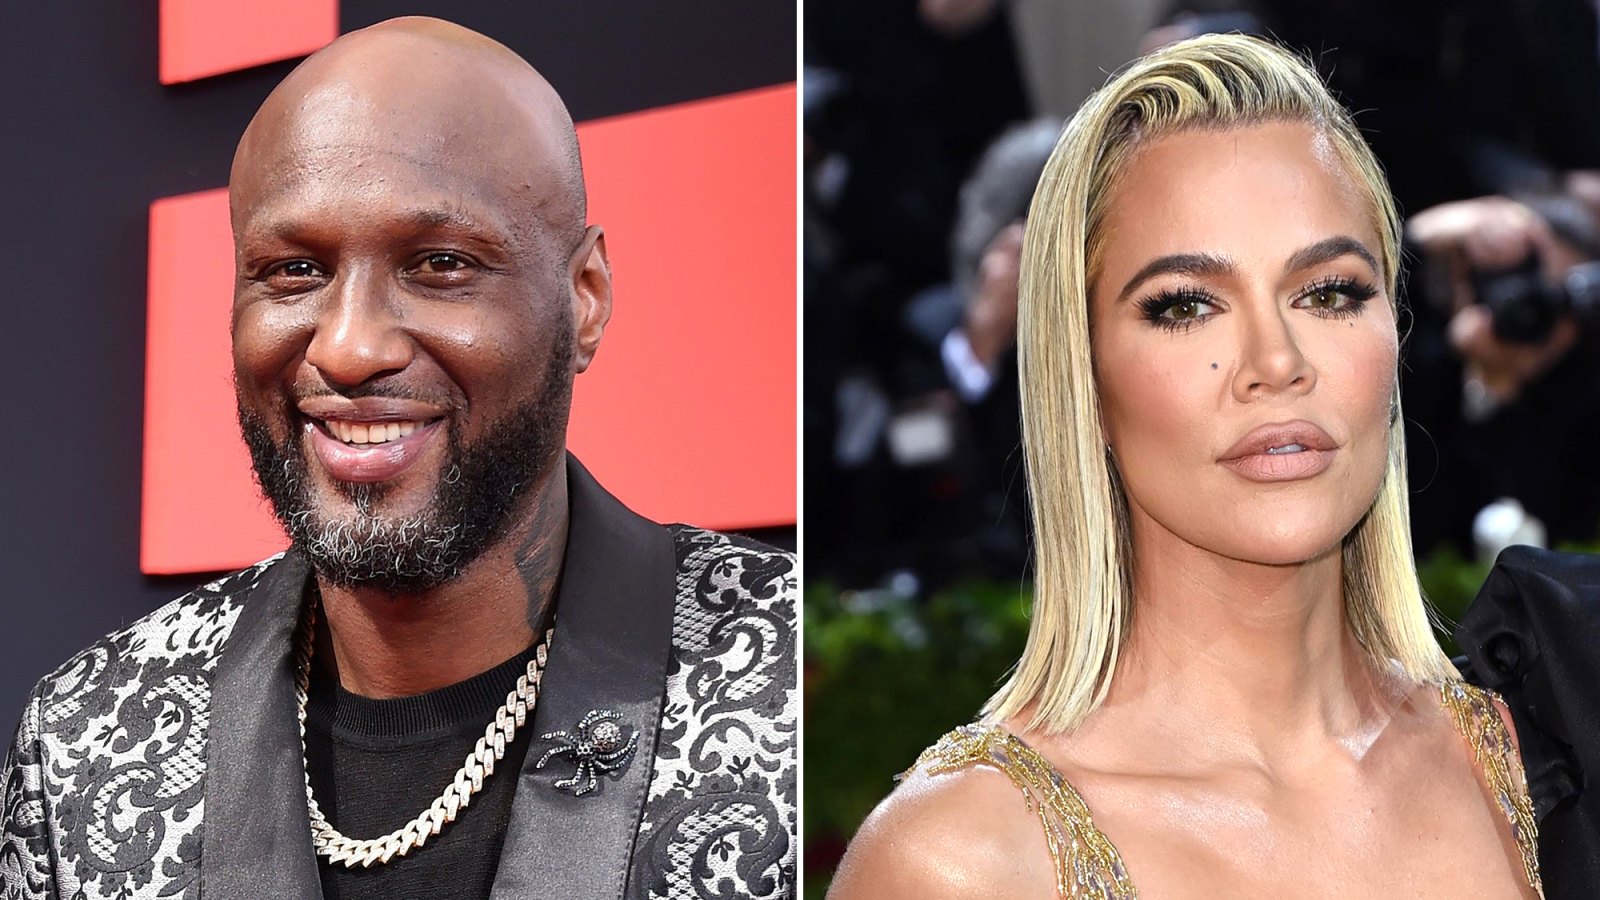 Lamar Odom Says Ex-Wife Khloe Kardashian 'Could Have Hollered' at Him for 2nd Baby